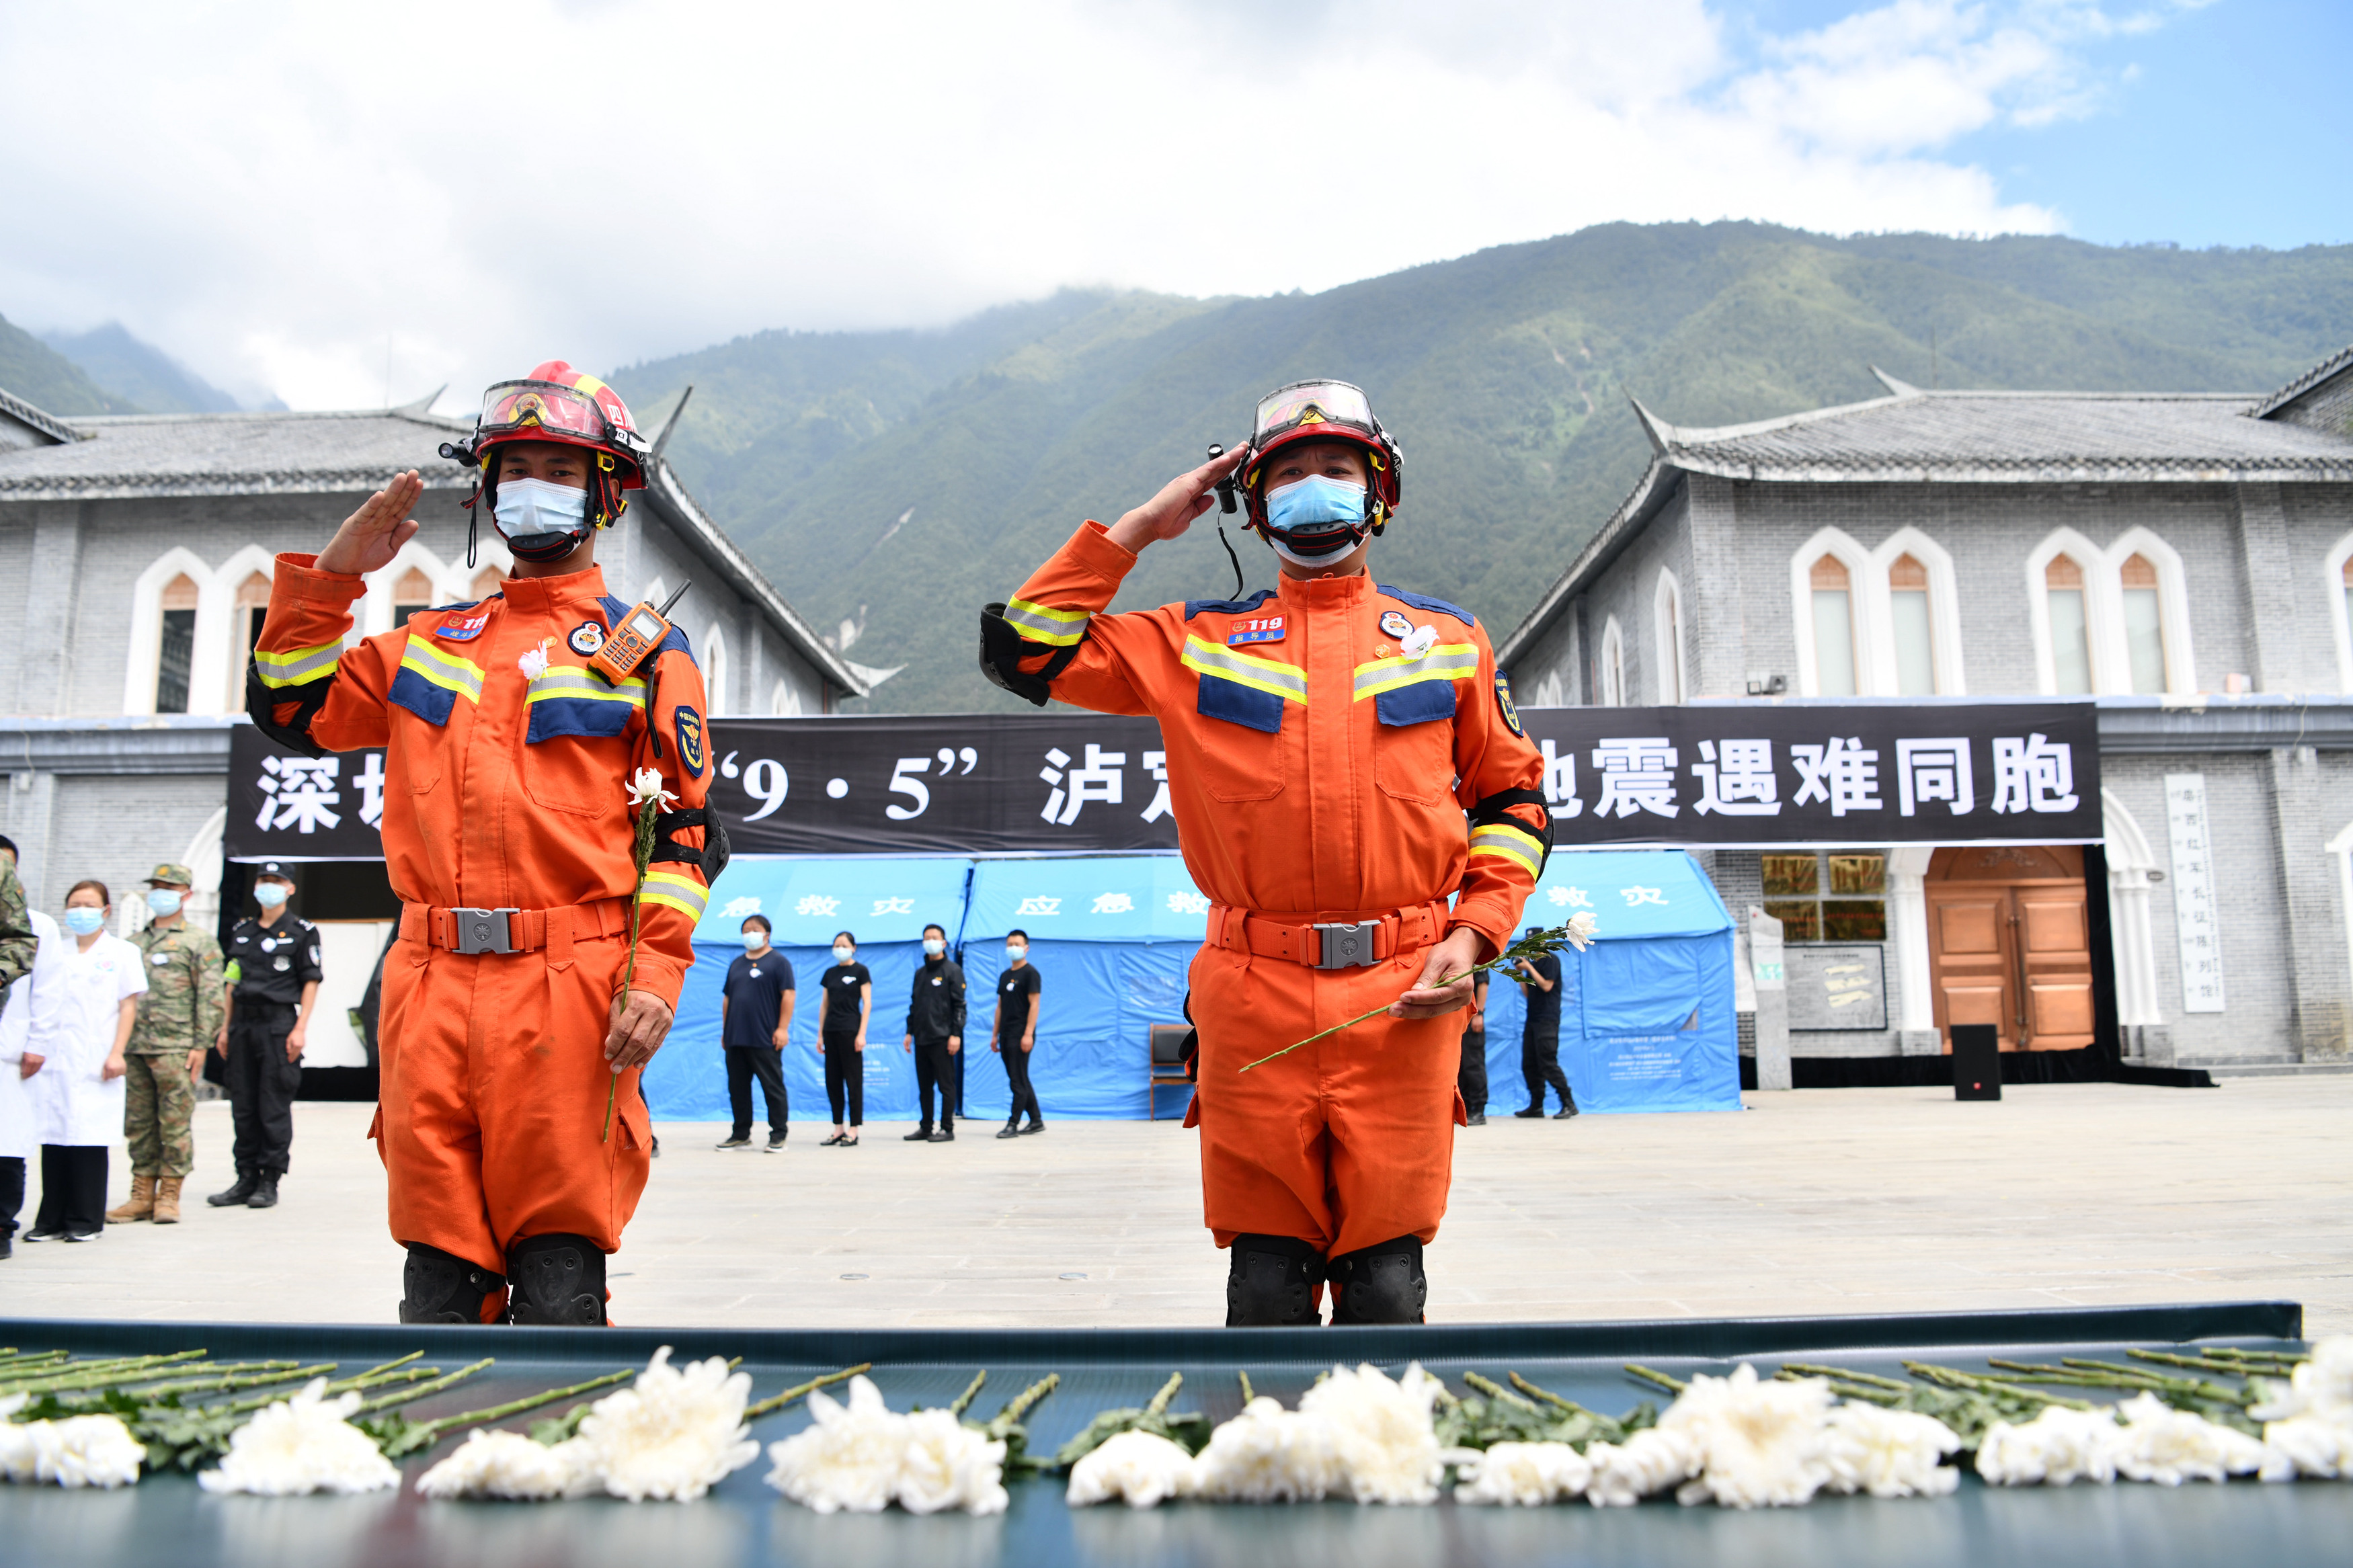 People mourn those who died in Luding, Southwest China’s Sichuan Province on September 12, 2022. The earthquake has claimed 93 lives as of 5 pm of Sunday. Similar ceremonies were also held in the counties of Shimian and Moxi, which were also hit hard by the earthquake. 